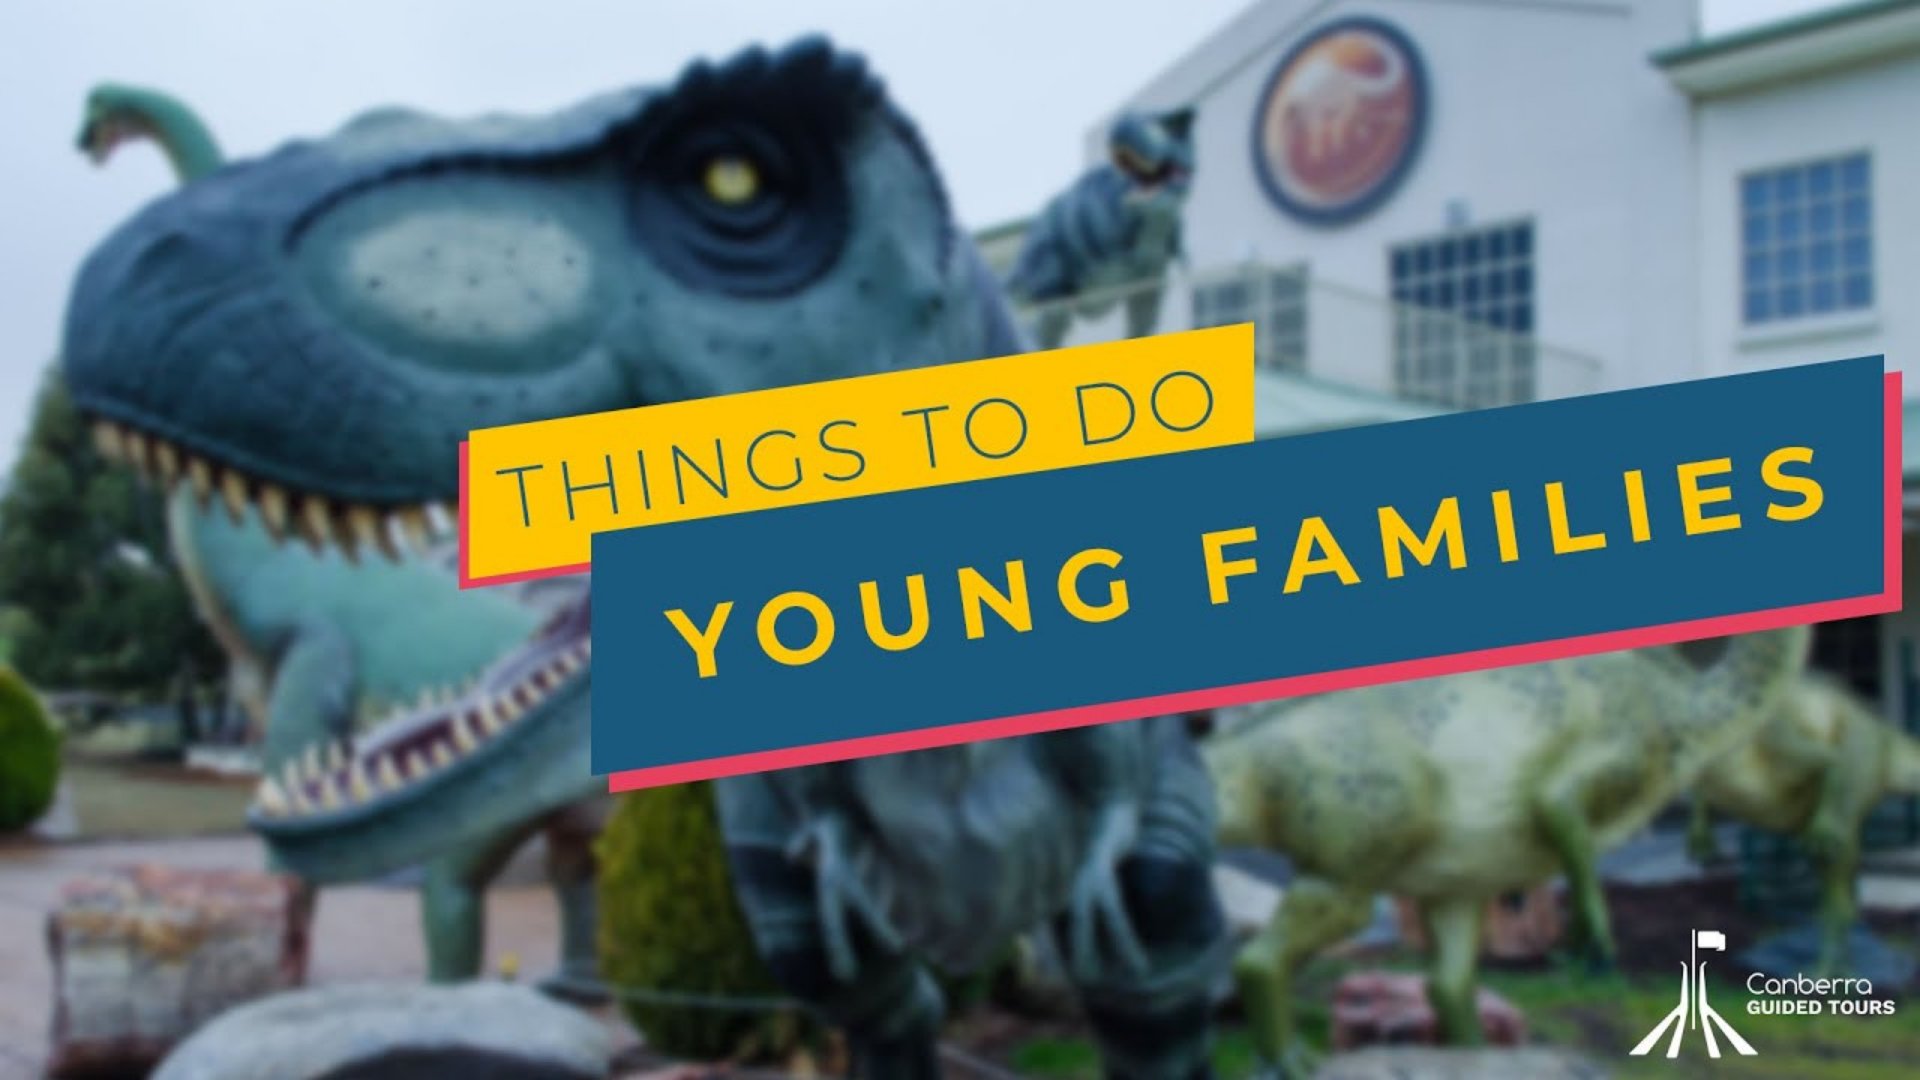 Things to do in canberra with young families